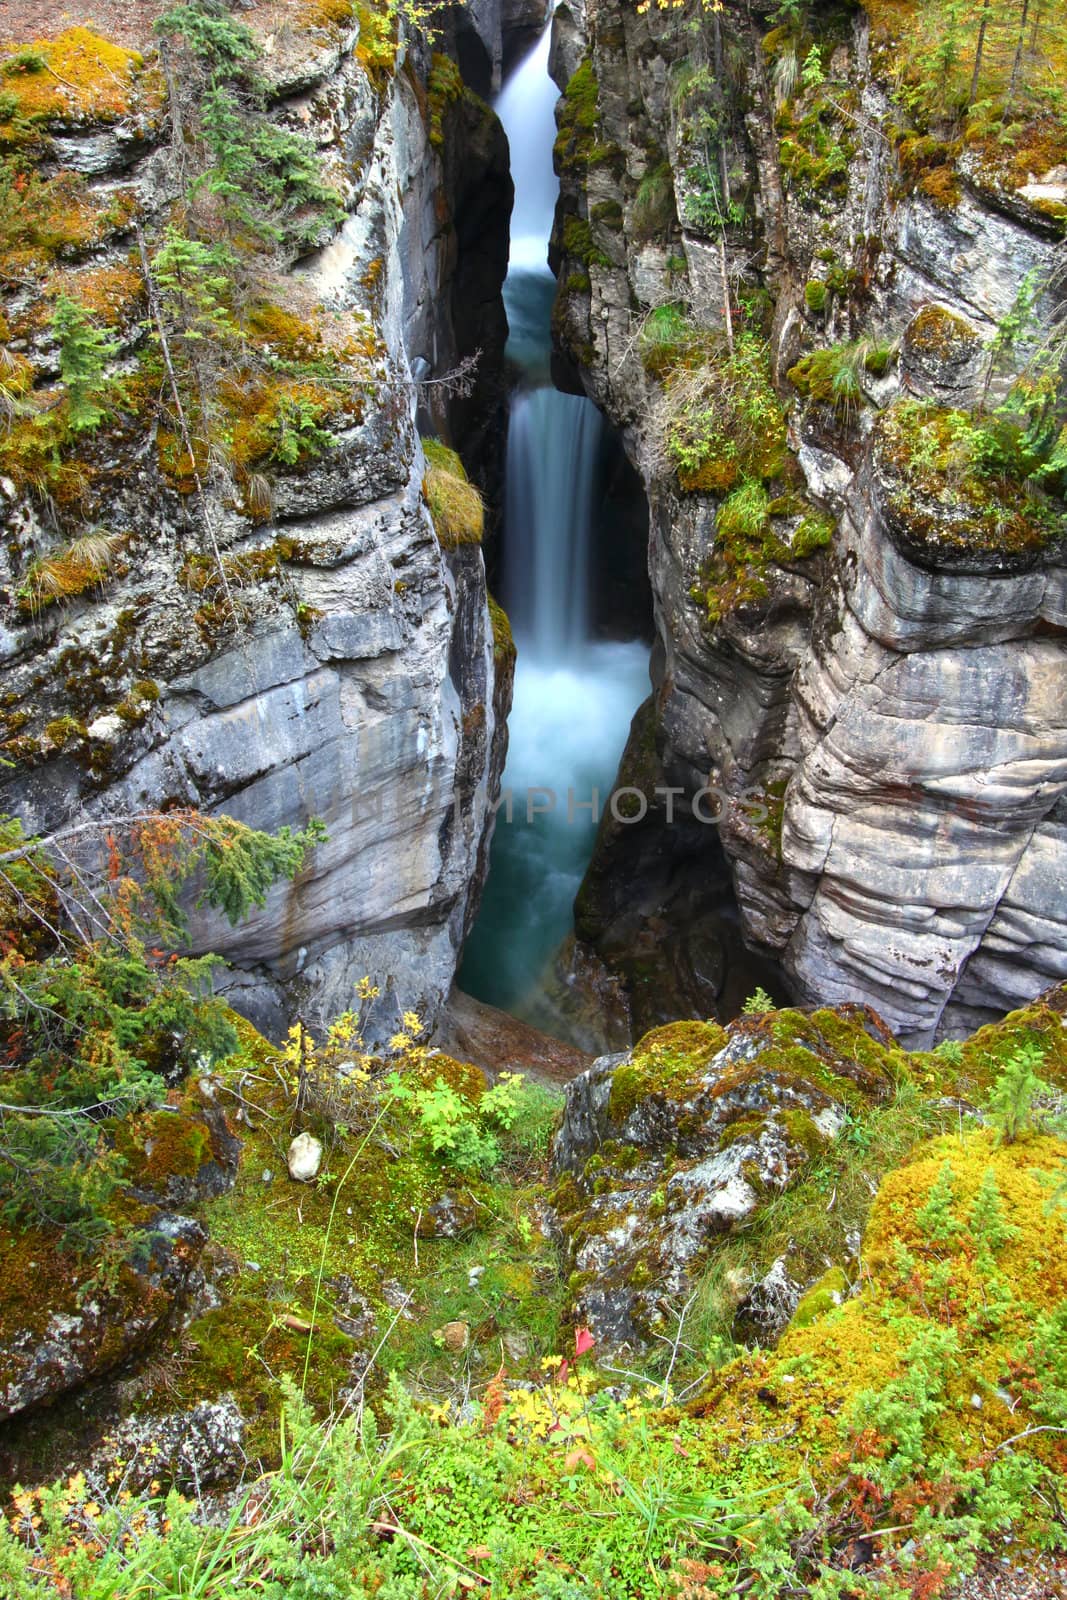 Lush vegetation surrounds a waterfall through Maligne Canyon of Jasper National Park in Canada.